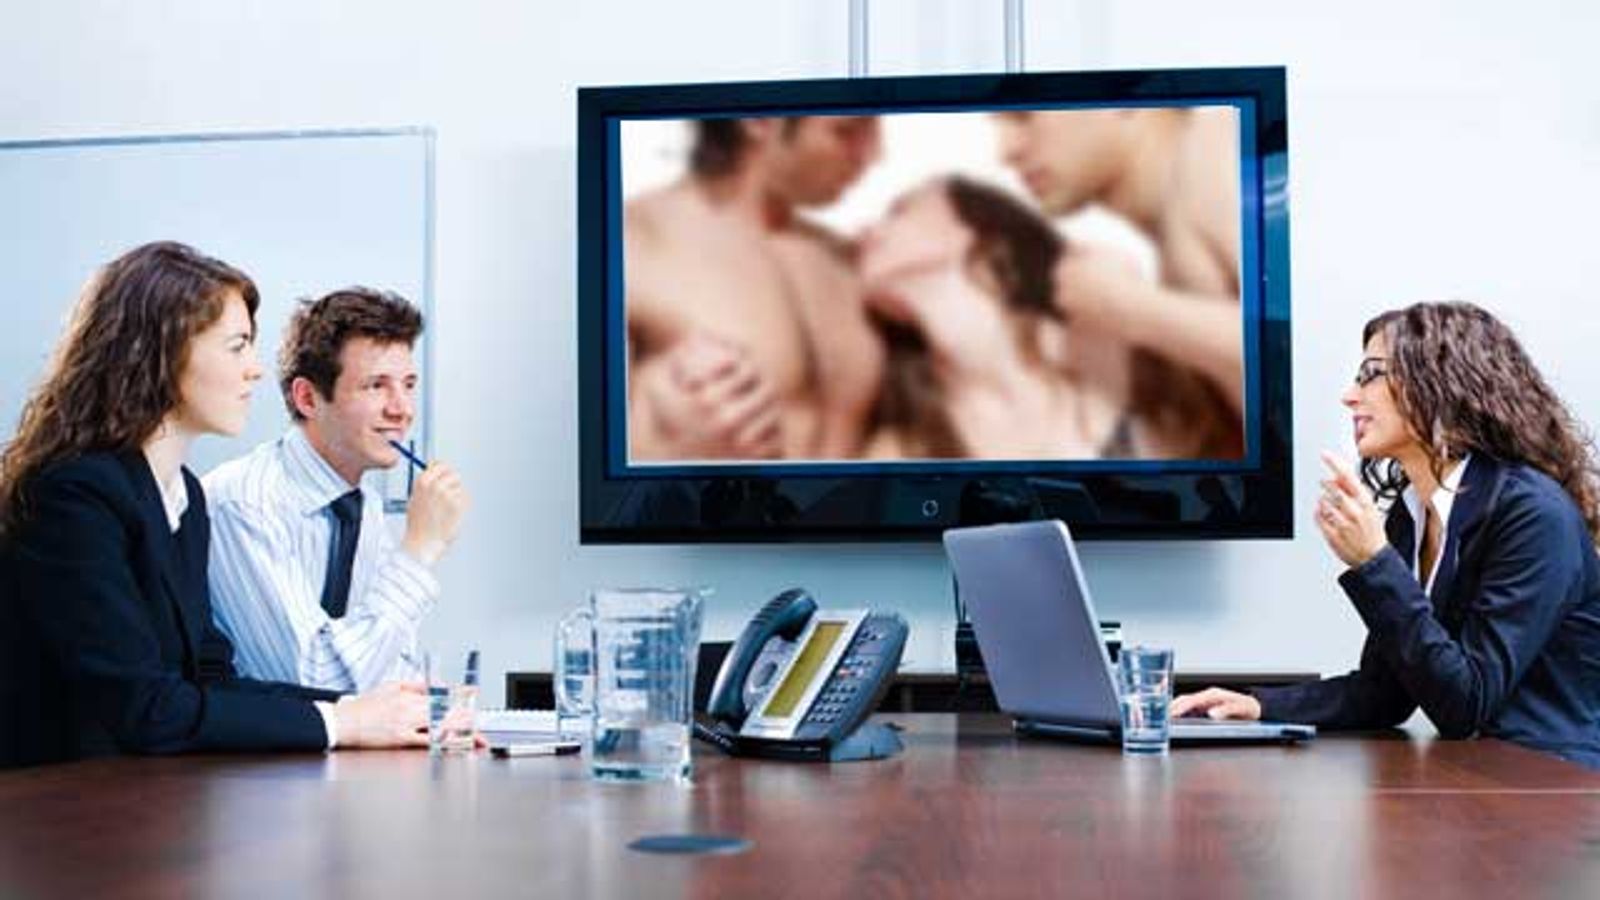 Porn in the Workplace Prompts Study on Employer Liability